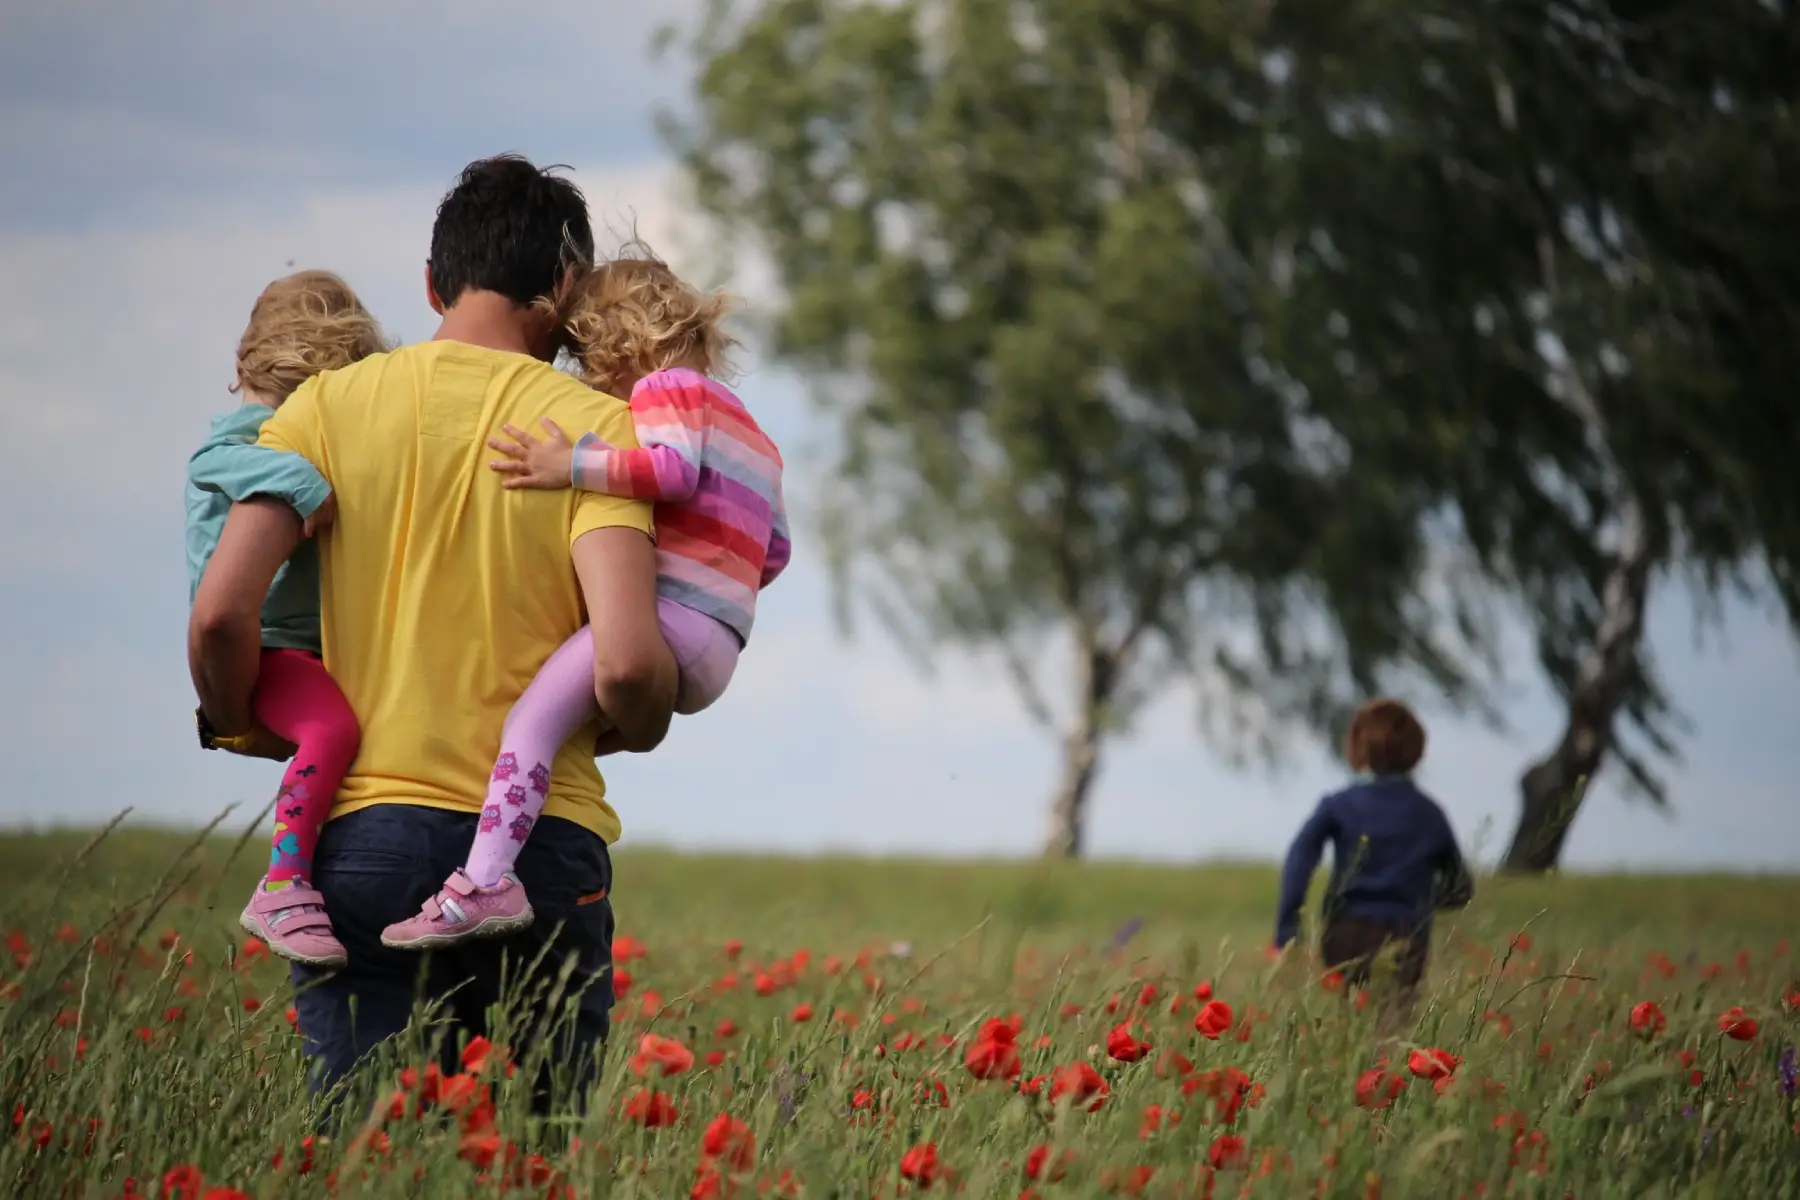 a man carrying his two small children in his arms as he walks across a field, away from the camera